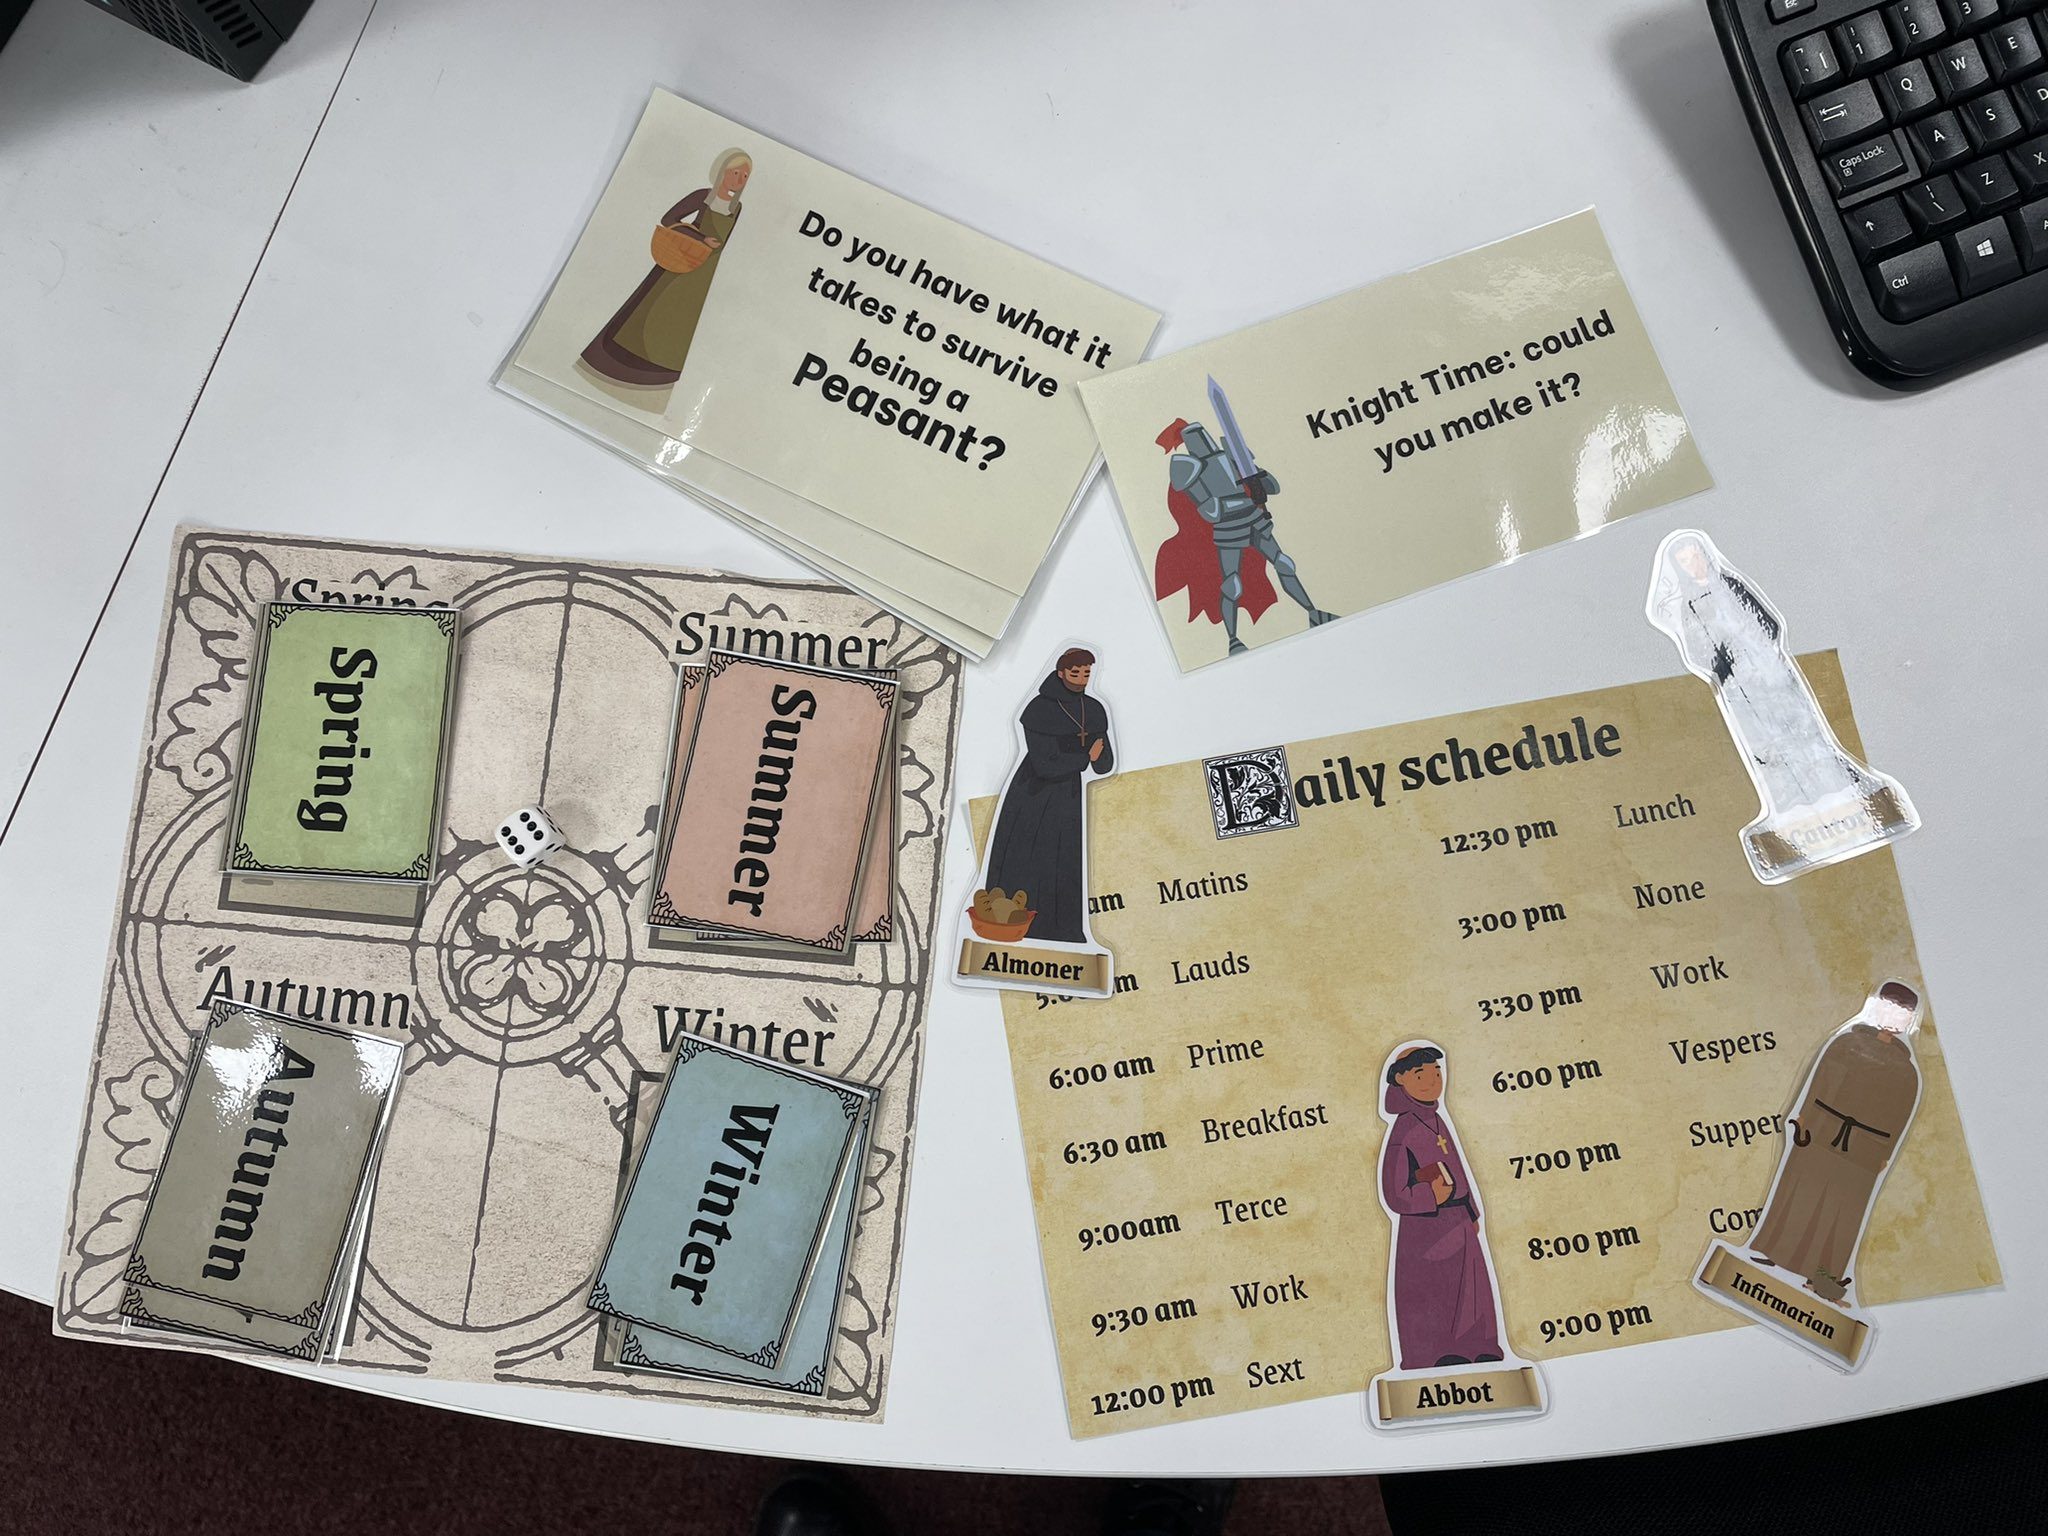 Medieval workshop resources on a table, showing cards from a peasant role-playing game, quiz cards about life as a monk and knight, and a copy of a medieval monk's daily schedule.